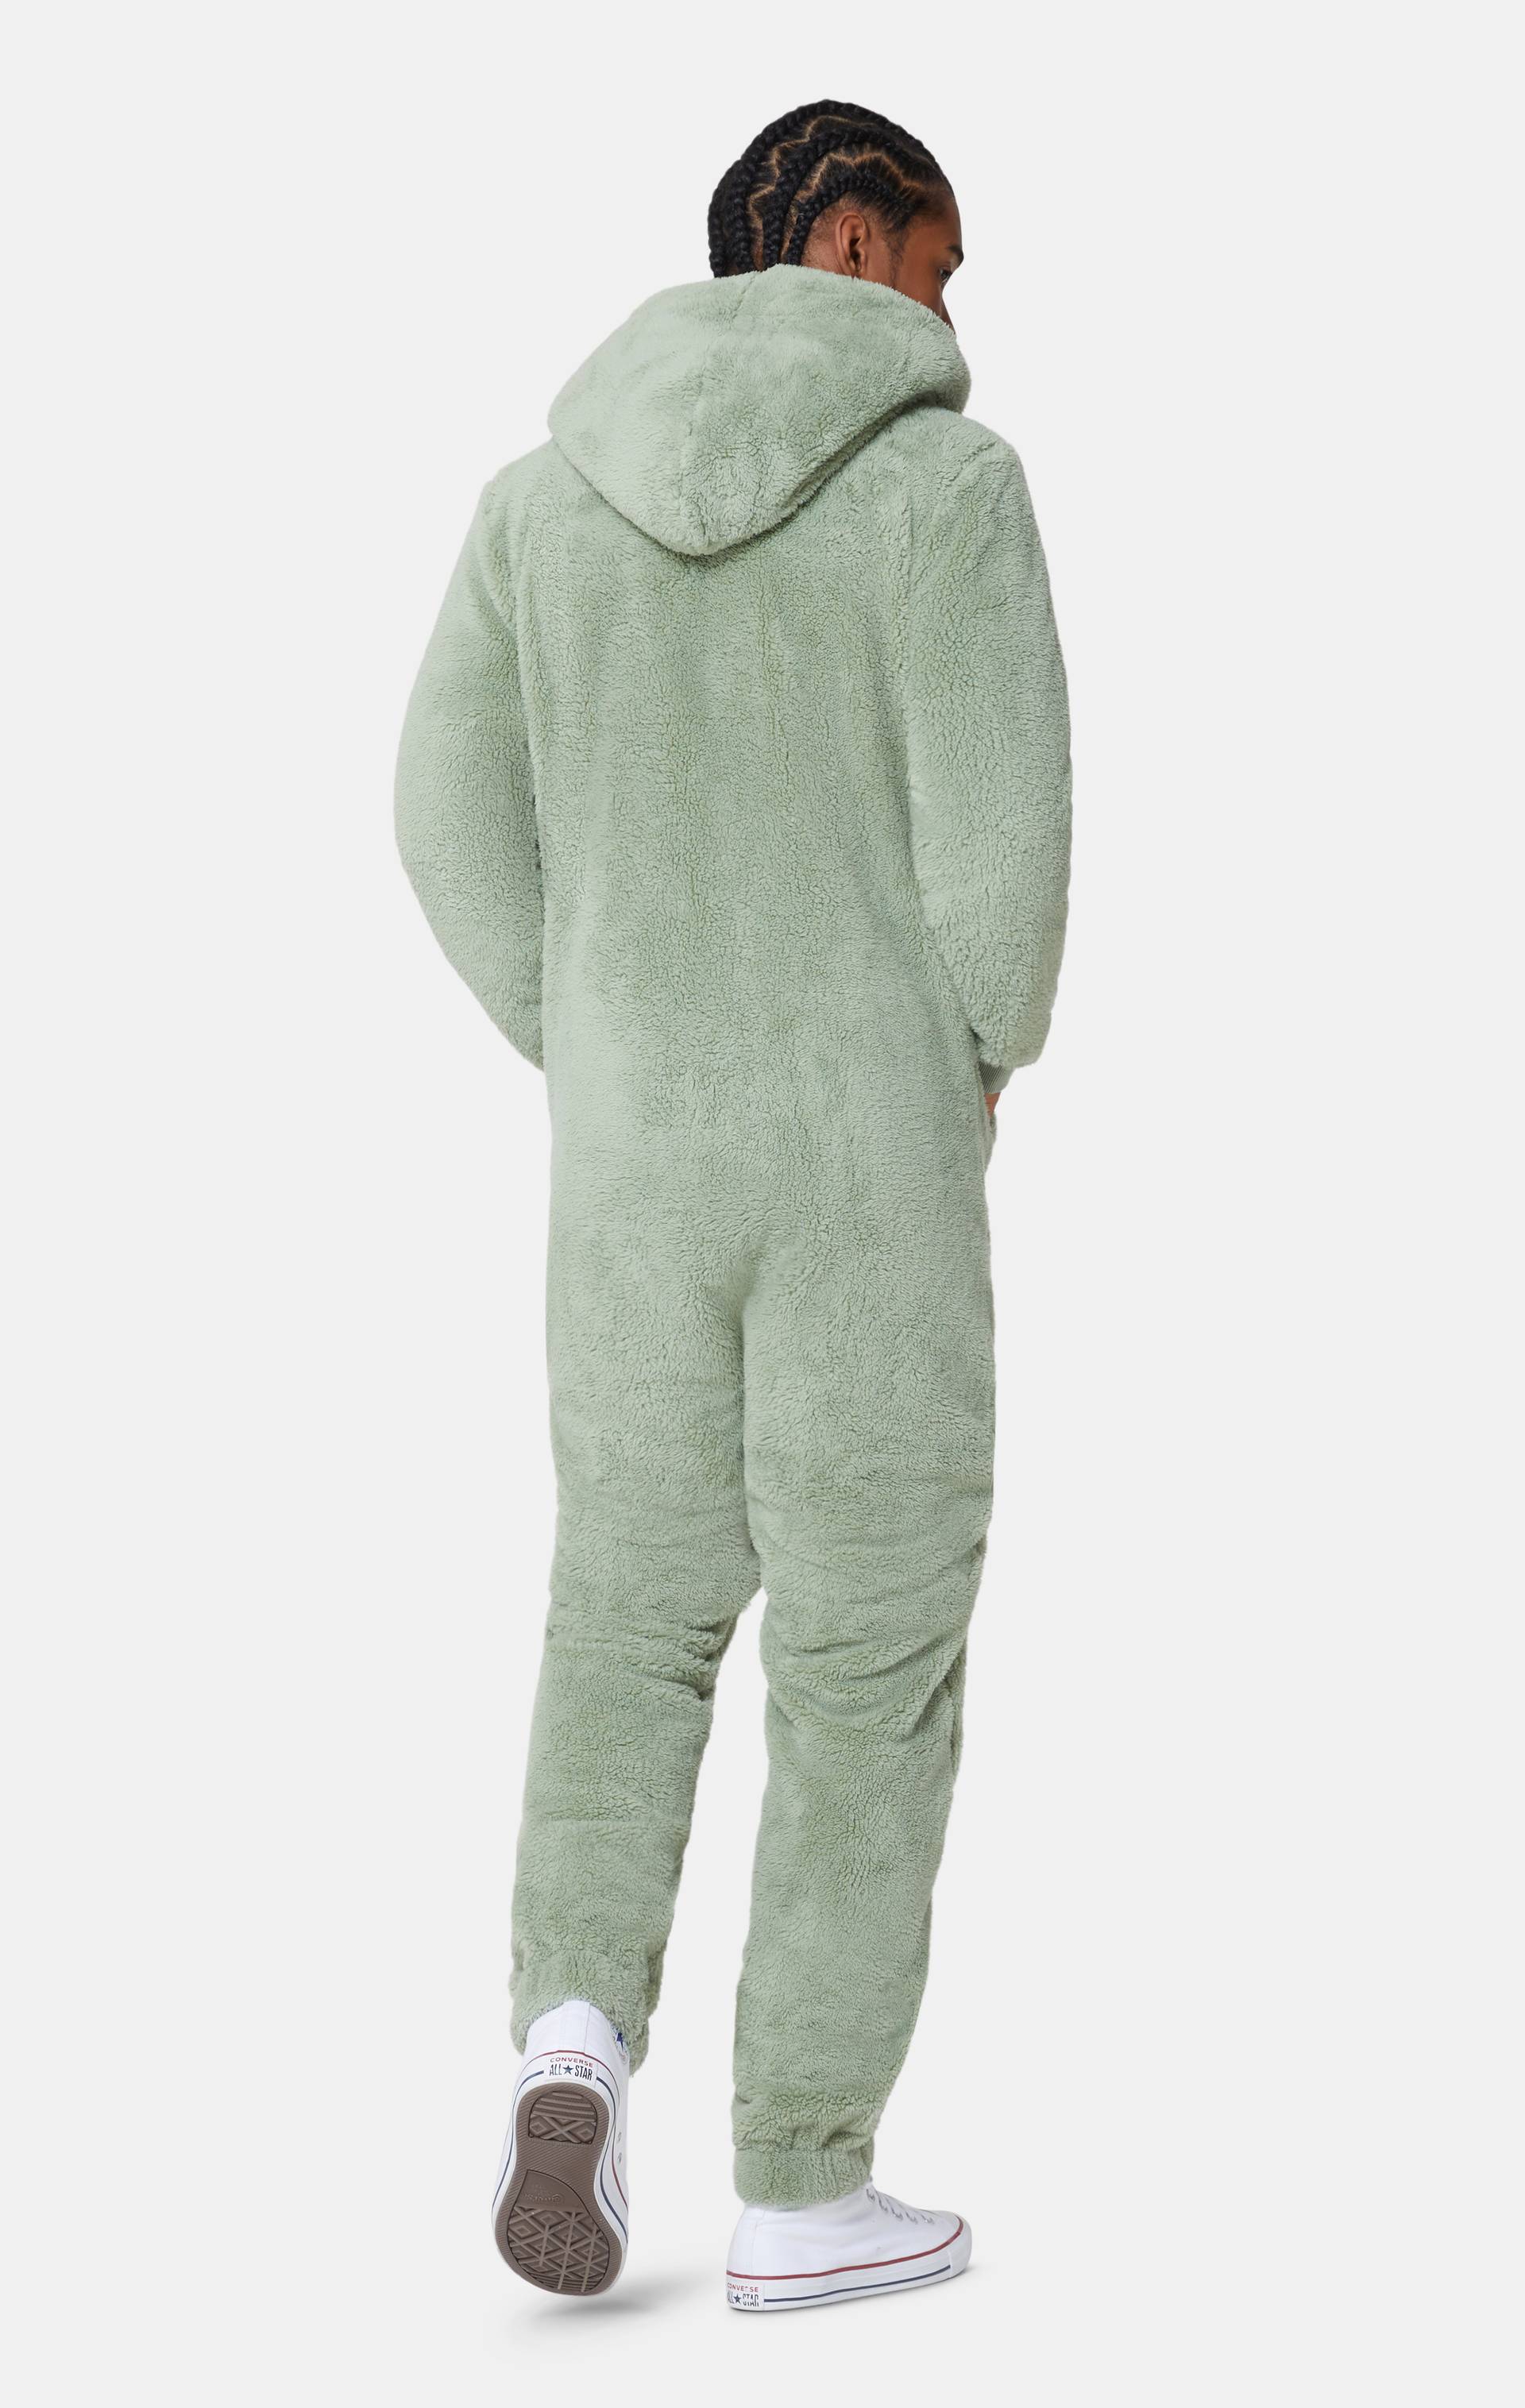 Onepiece The Puppy Jumpsuit Green - 4